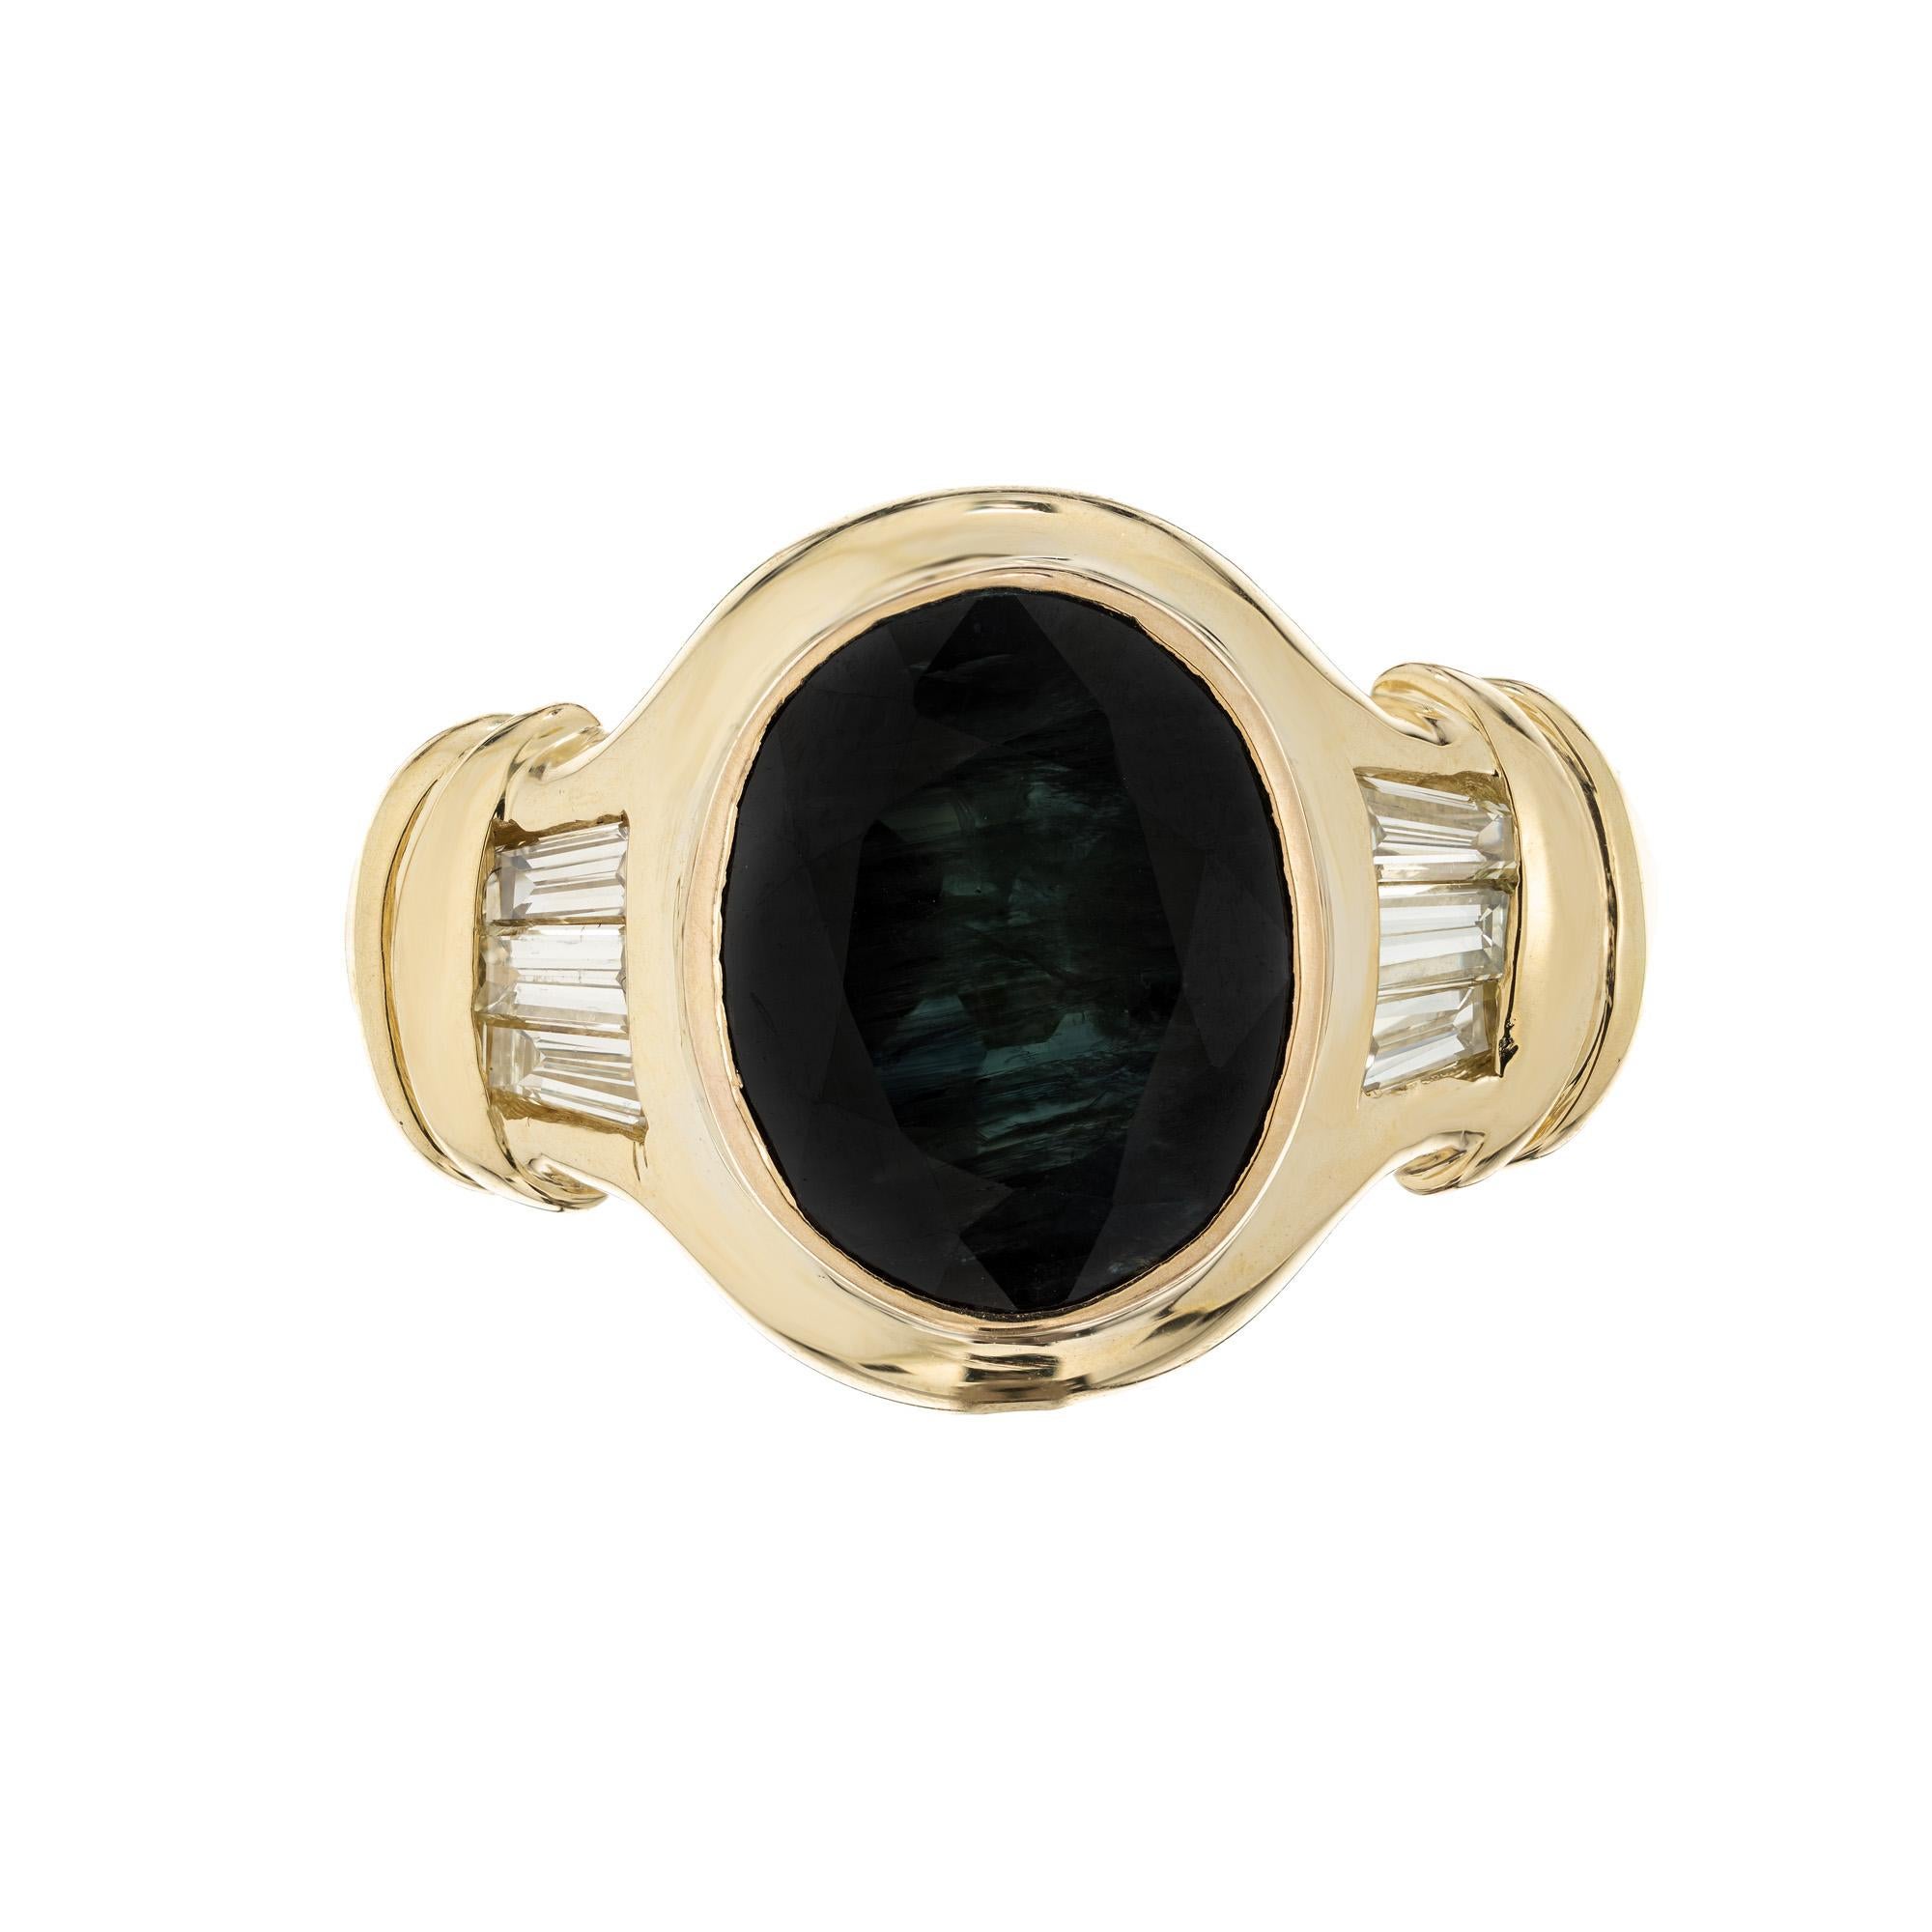 1960's mid-century Greenish blue sapphire engagement ring. The center piece of this ring is a 4.53 oval bezel set greenish blue sapphire. Mounted int a 18k yellow gold setting and accented by 3 tapered baguettes on each side. The GIA has certified